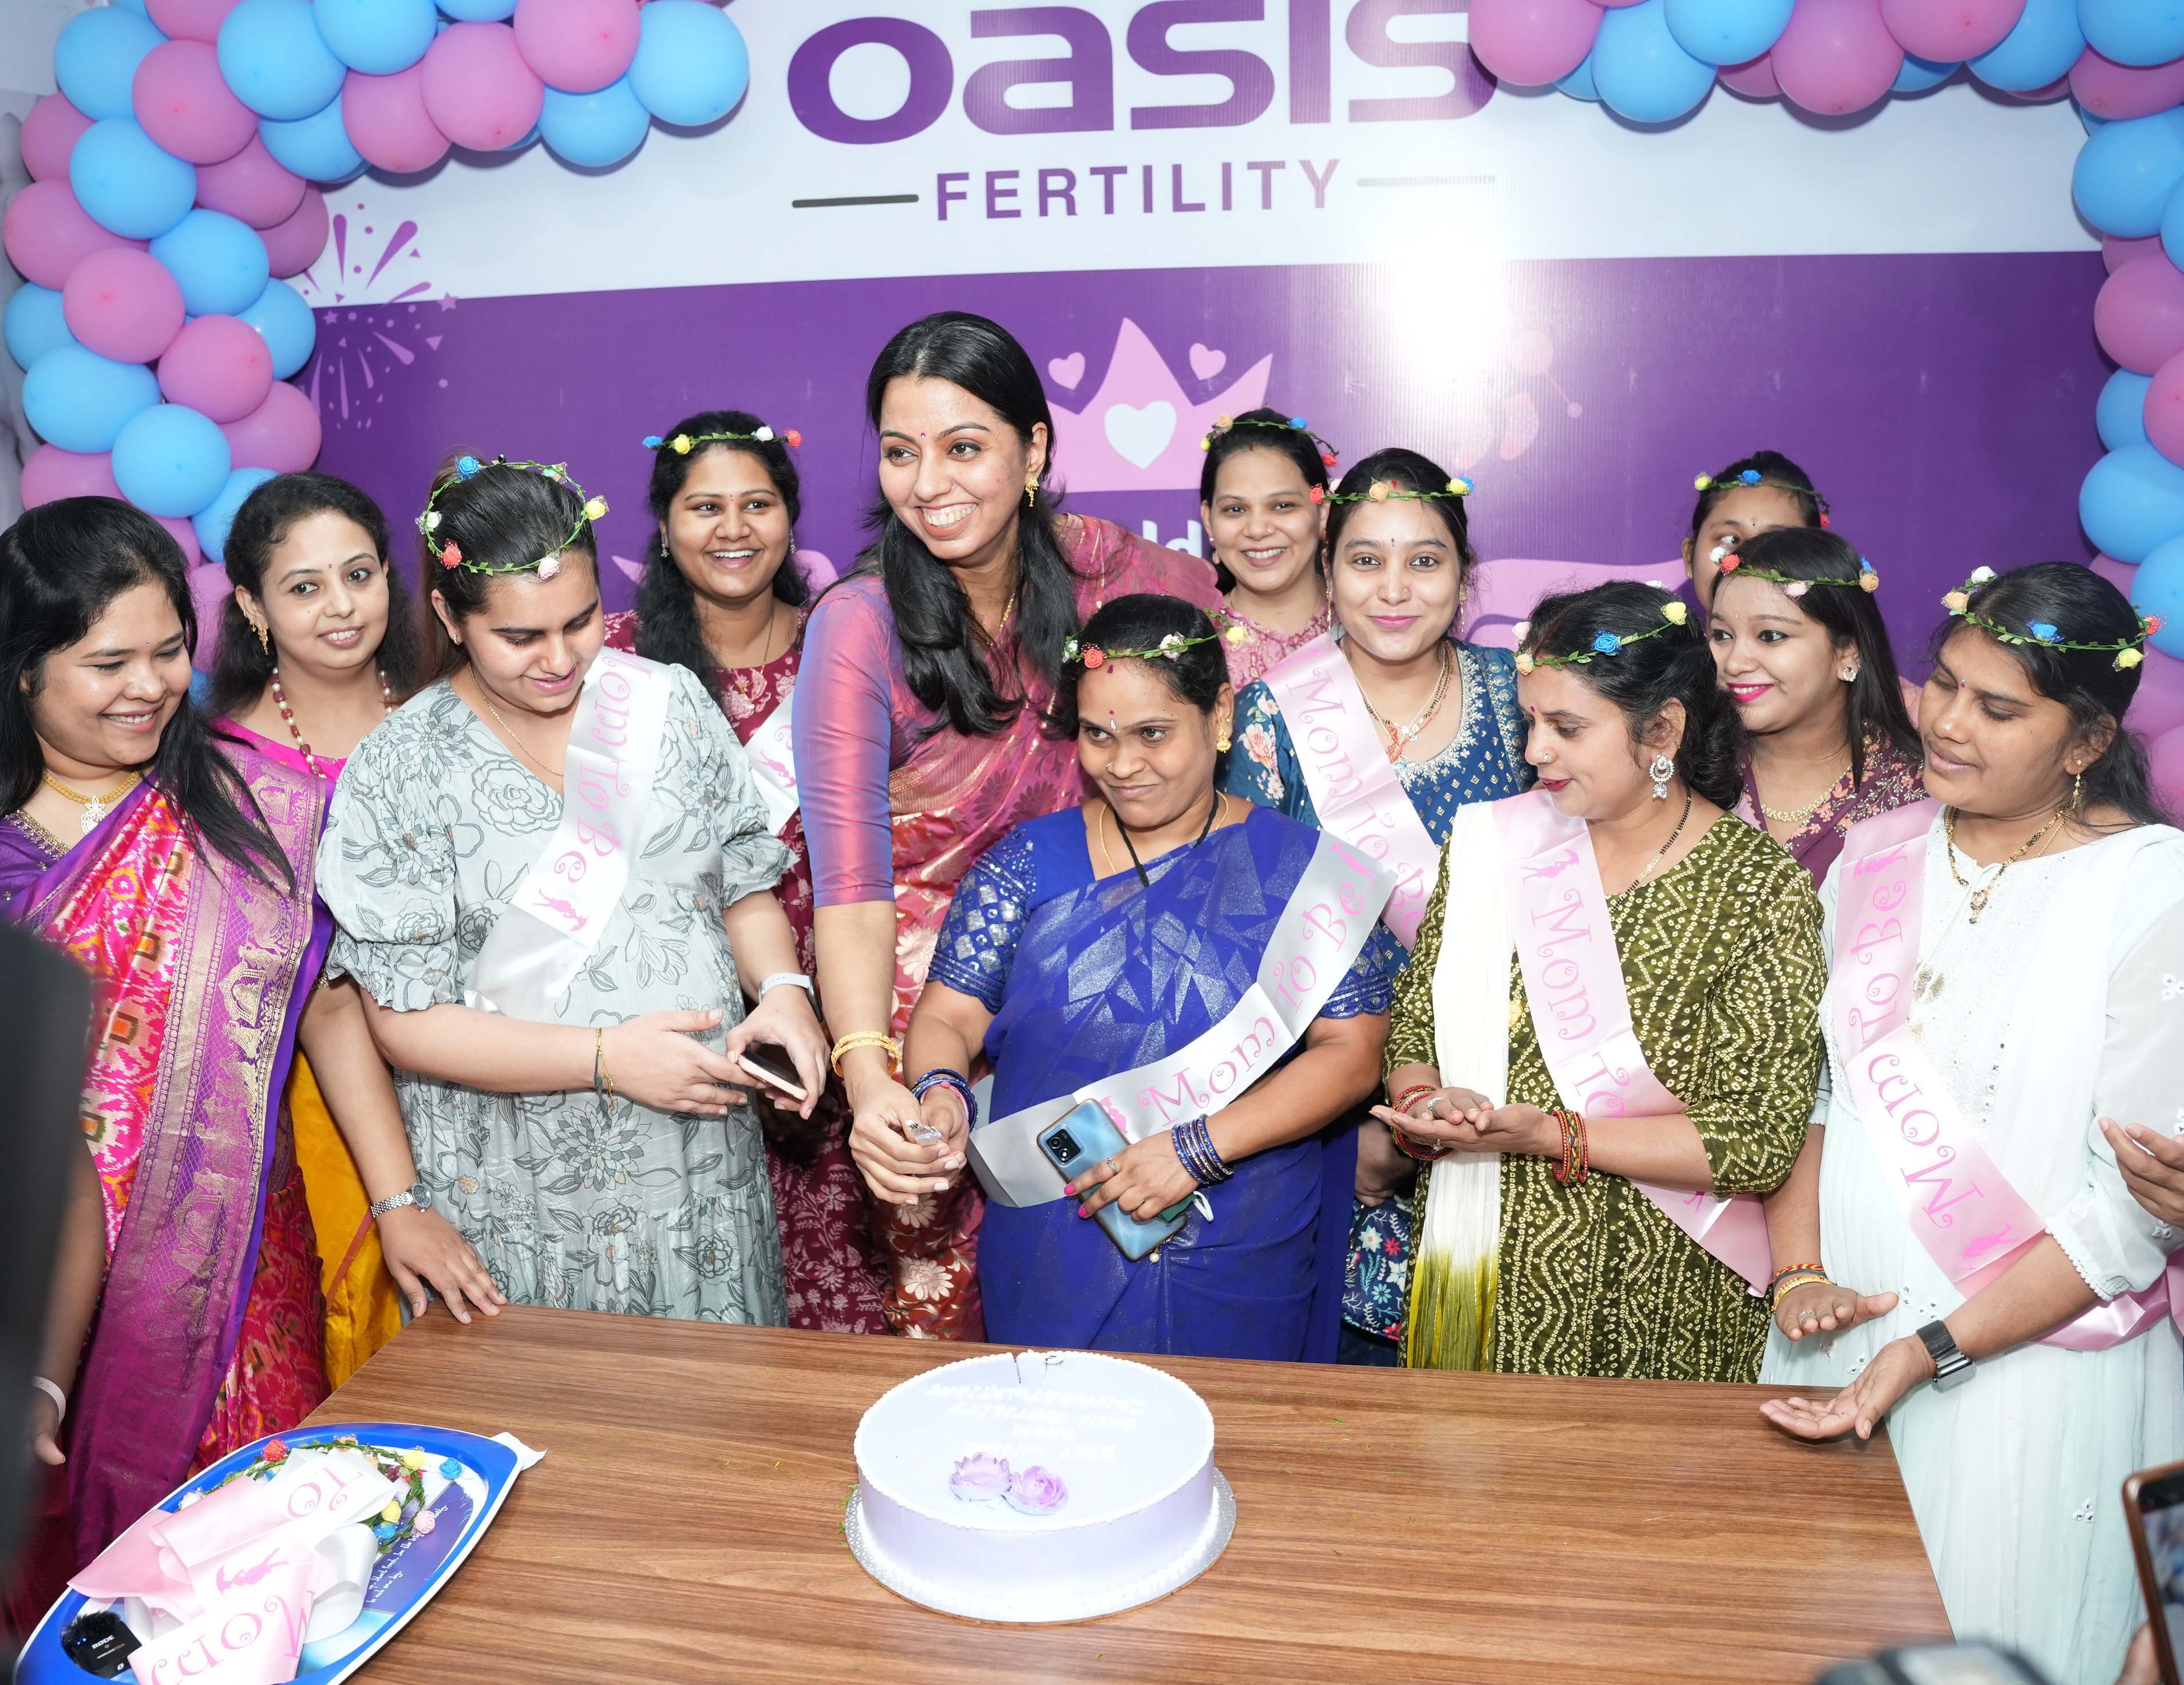 Oasis Fertility, Secunderabad conducts mass baby shower to felicitate couples conceived through IVF